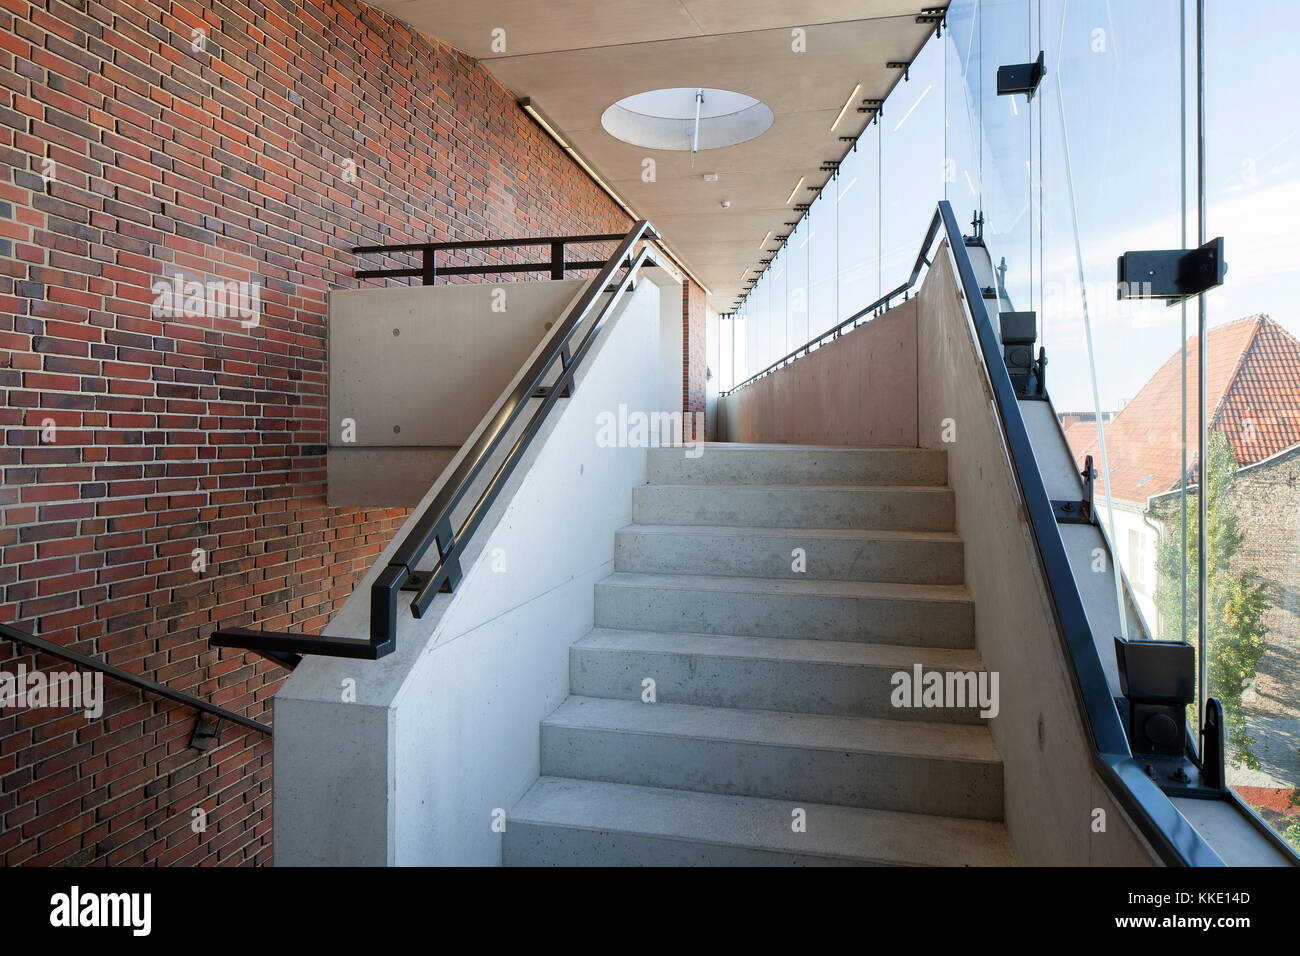 Staircase to the top floor. Kindl Centre For Contemporary Art, Berlin, Germany. Architect: grisard'architektur eth sia, 2017. Stock Photo